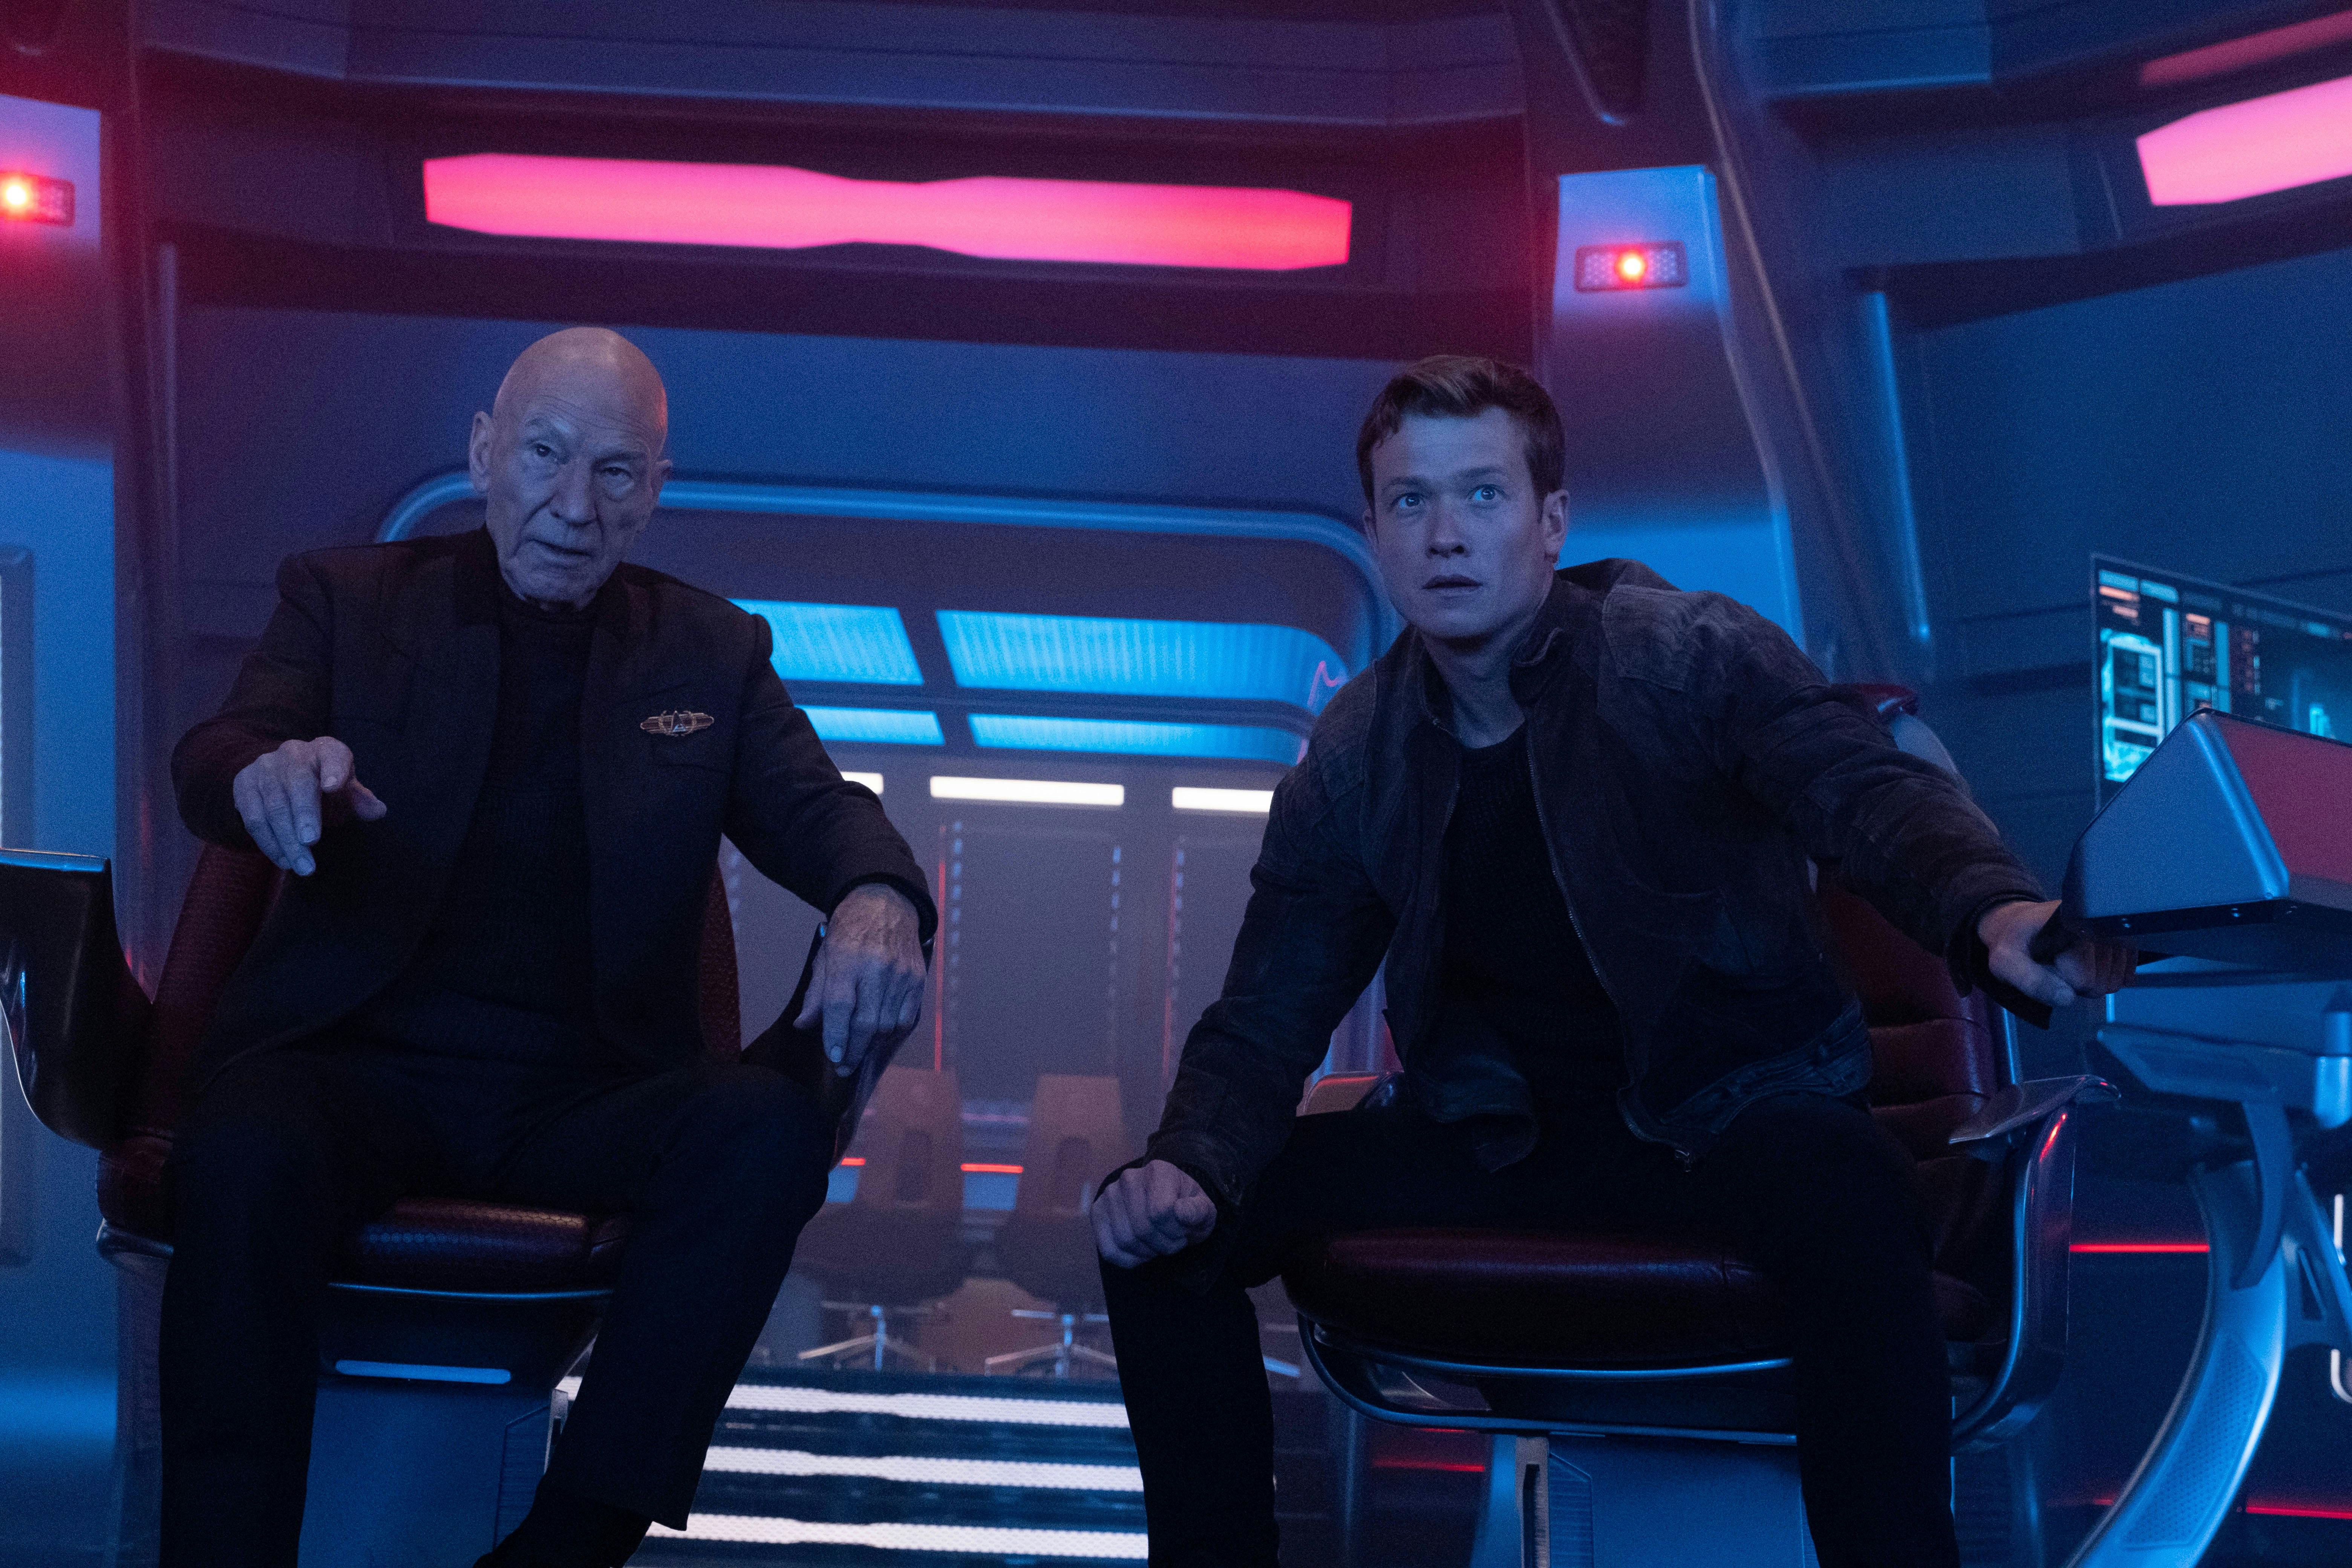 Jean-Luc Picard and Jack Crusher sit on the bridge of the Titan and look ahead